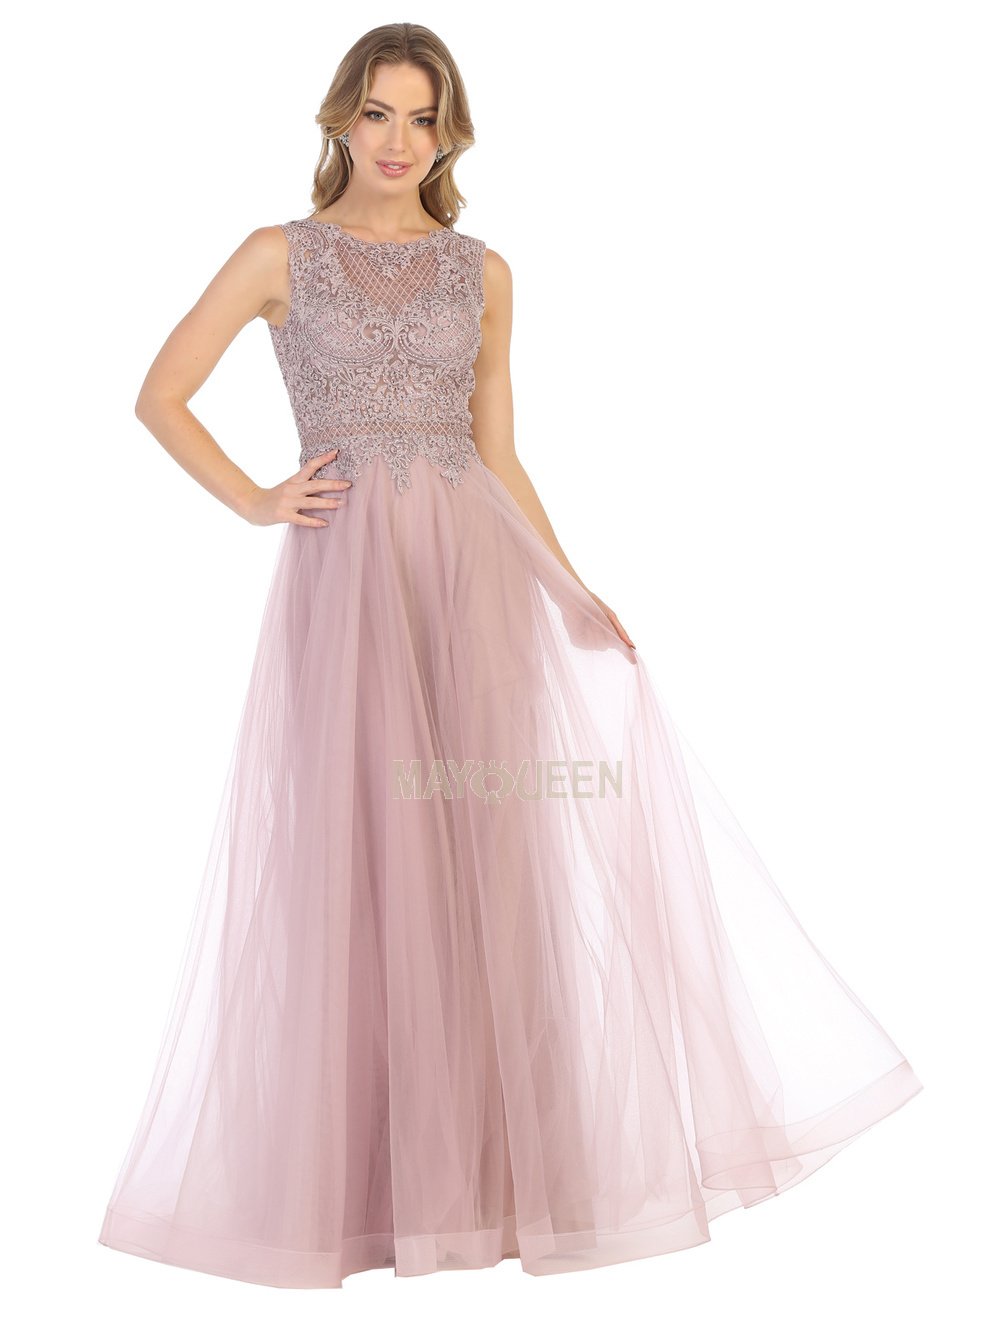 May Queen - MQ1717 Sheer Lattice Rendered Tulle Dress In Pink